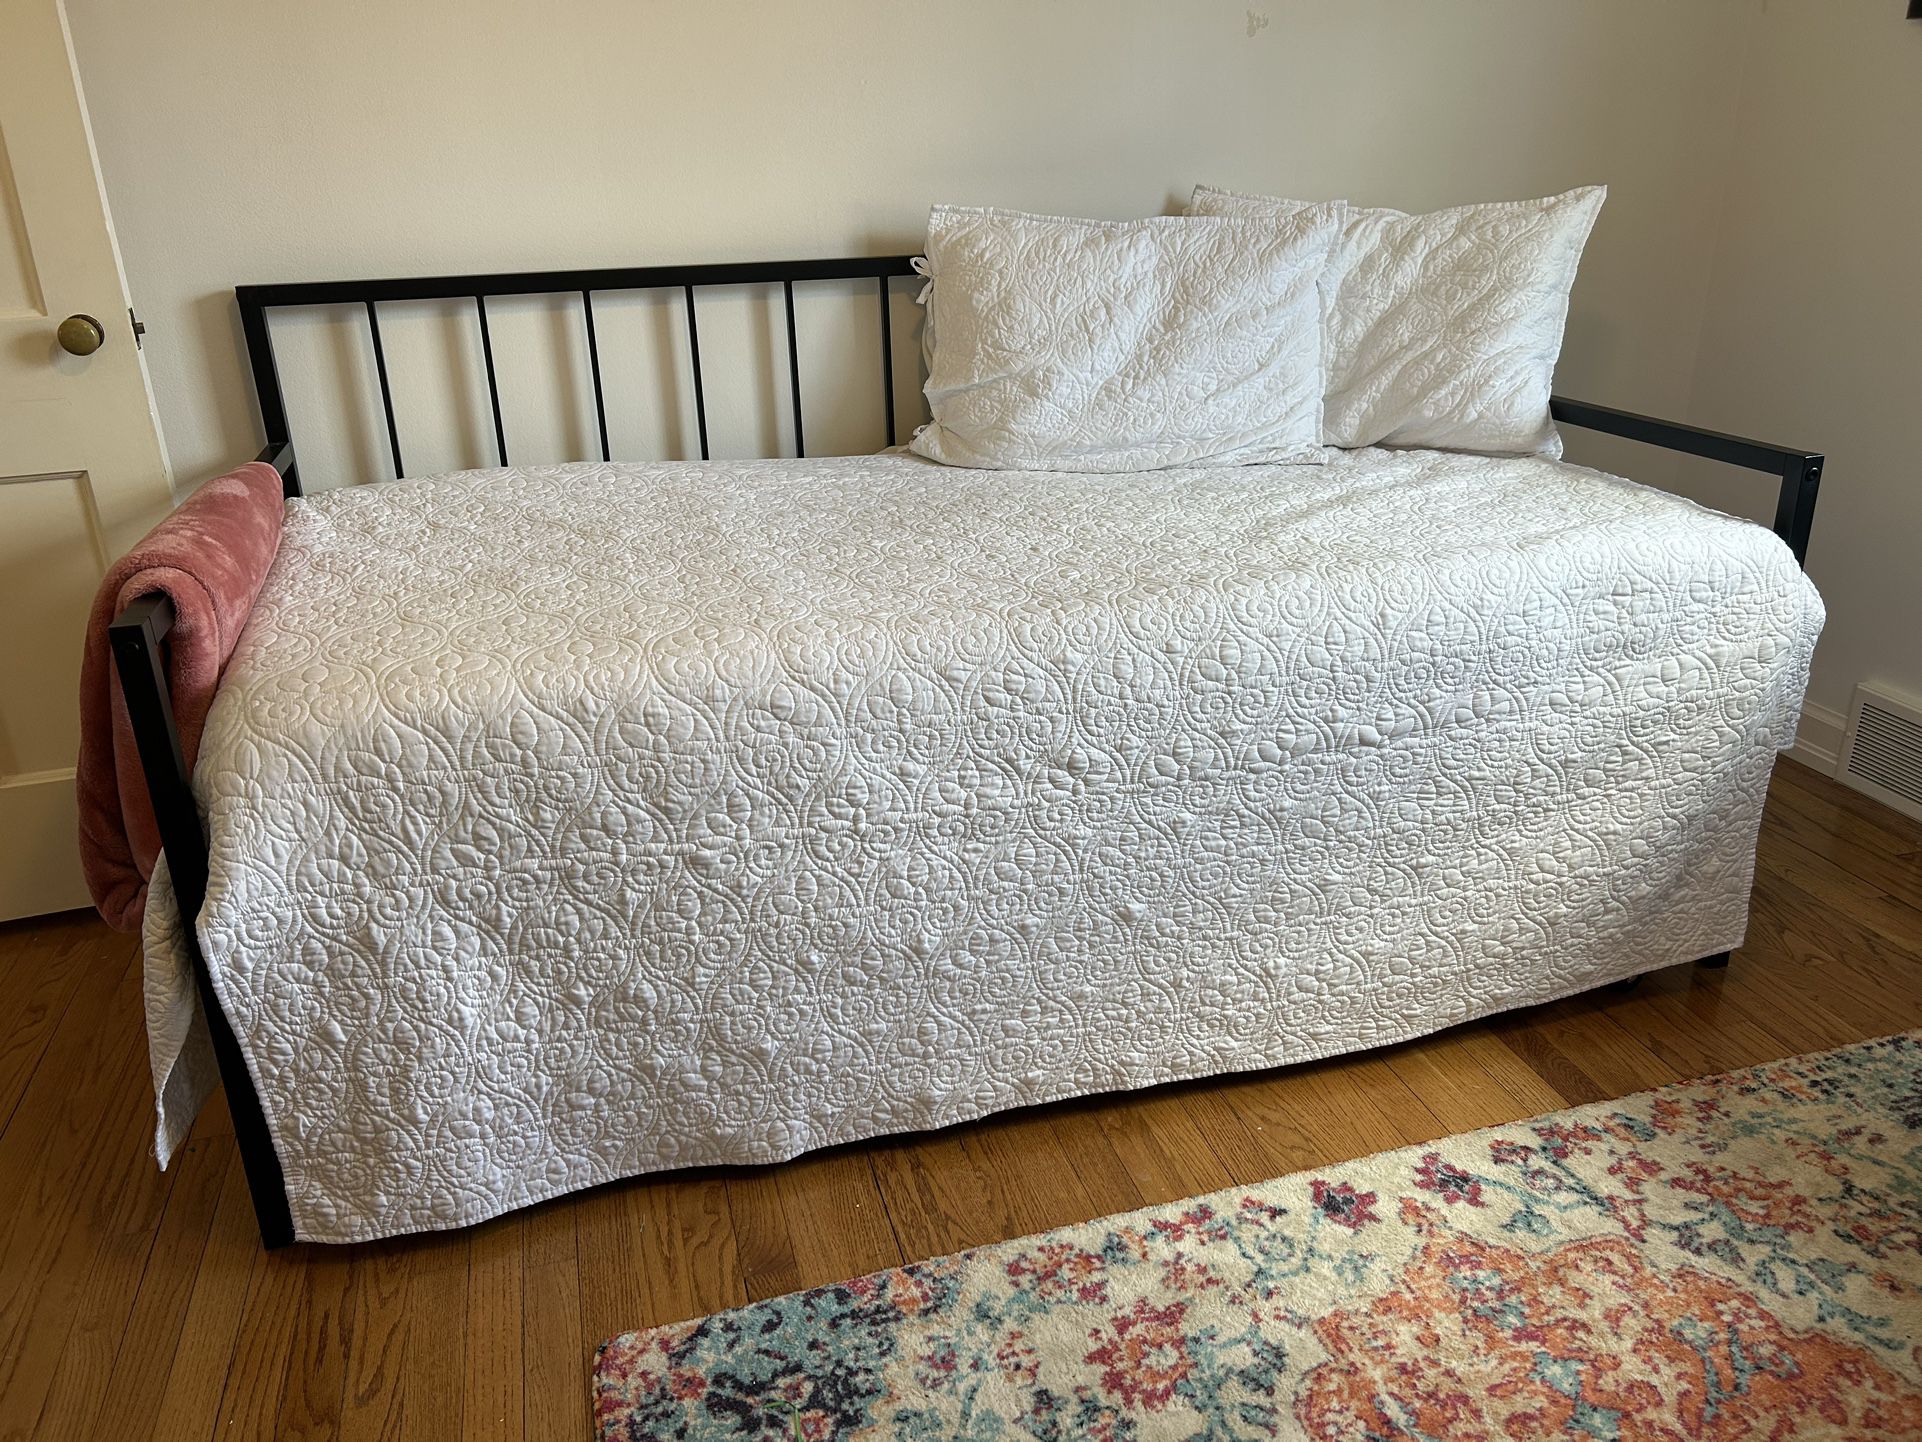 Trundle bed with Mattresses and Linens 